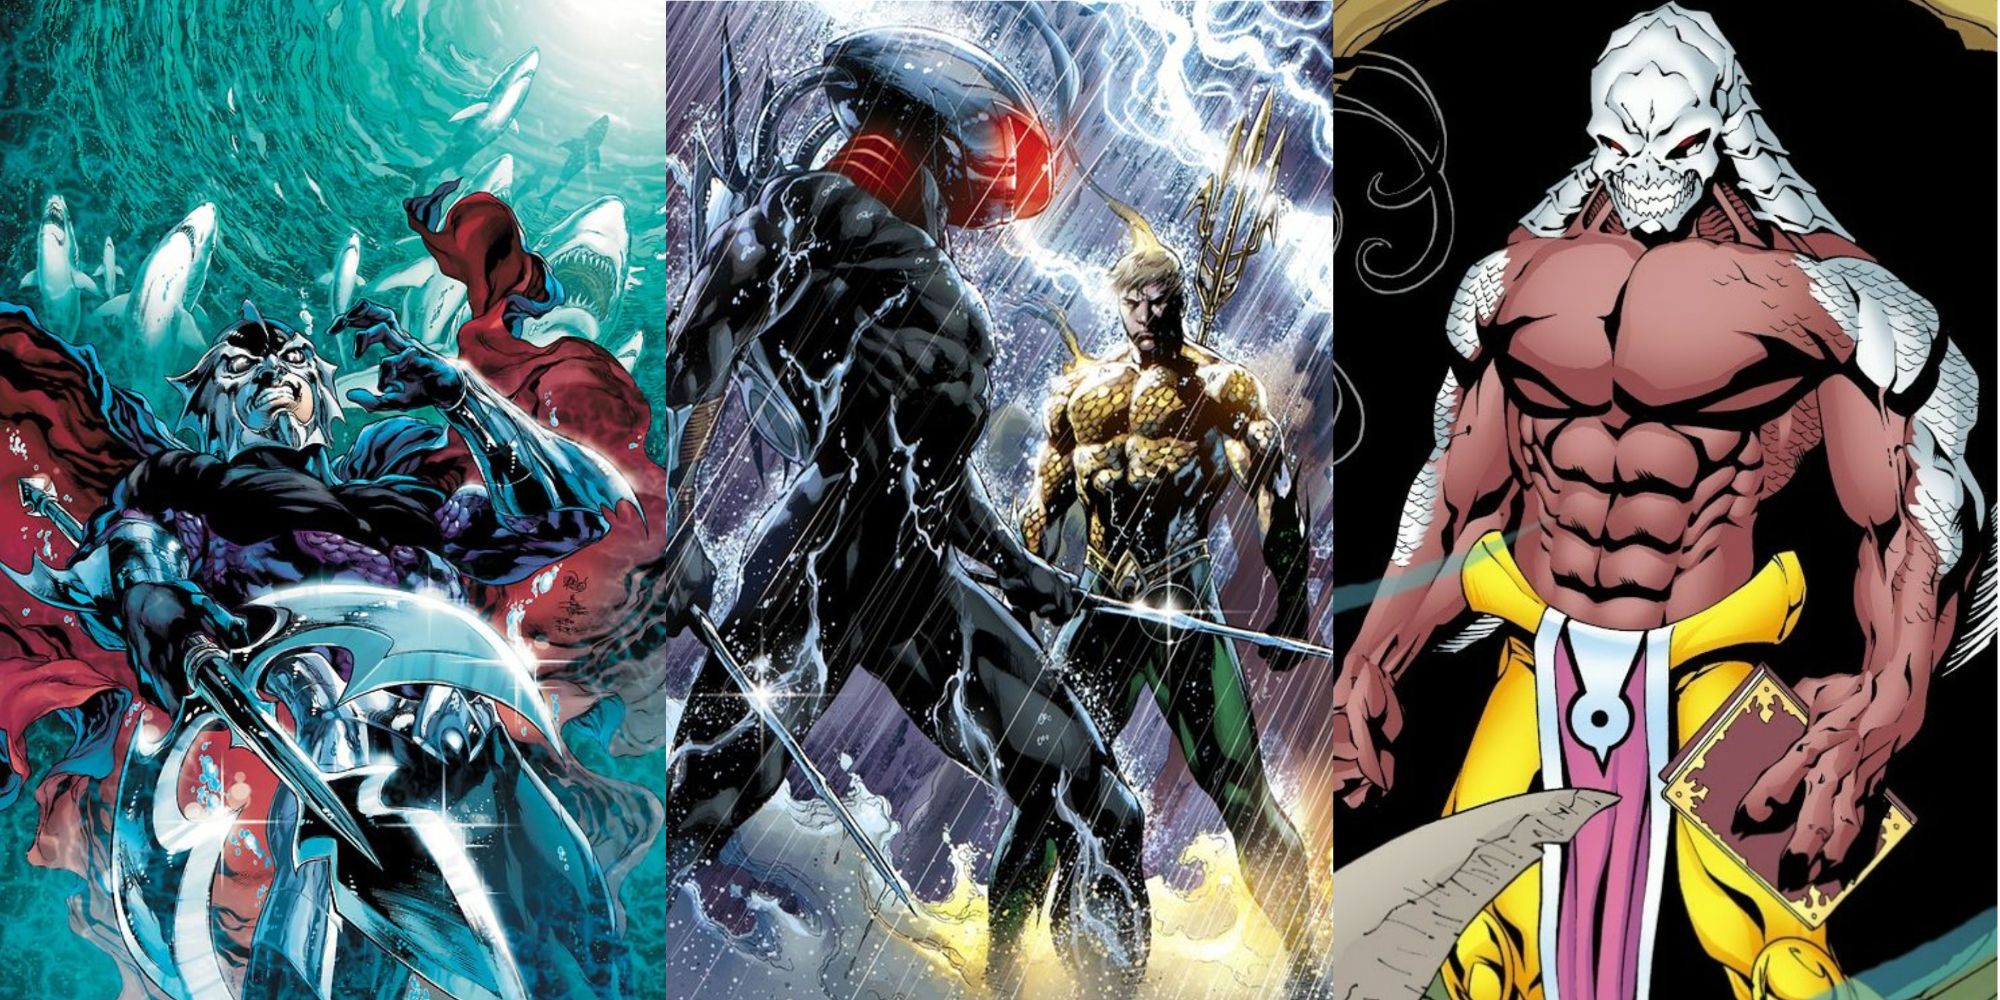 From left to right: Ocean Master, Black Manta and Aquaman squaring off, and Charybdis